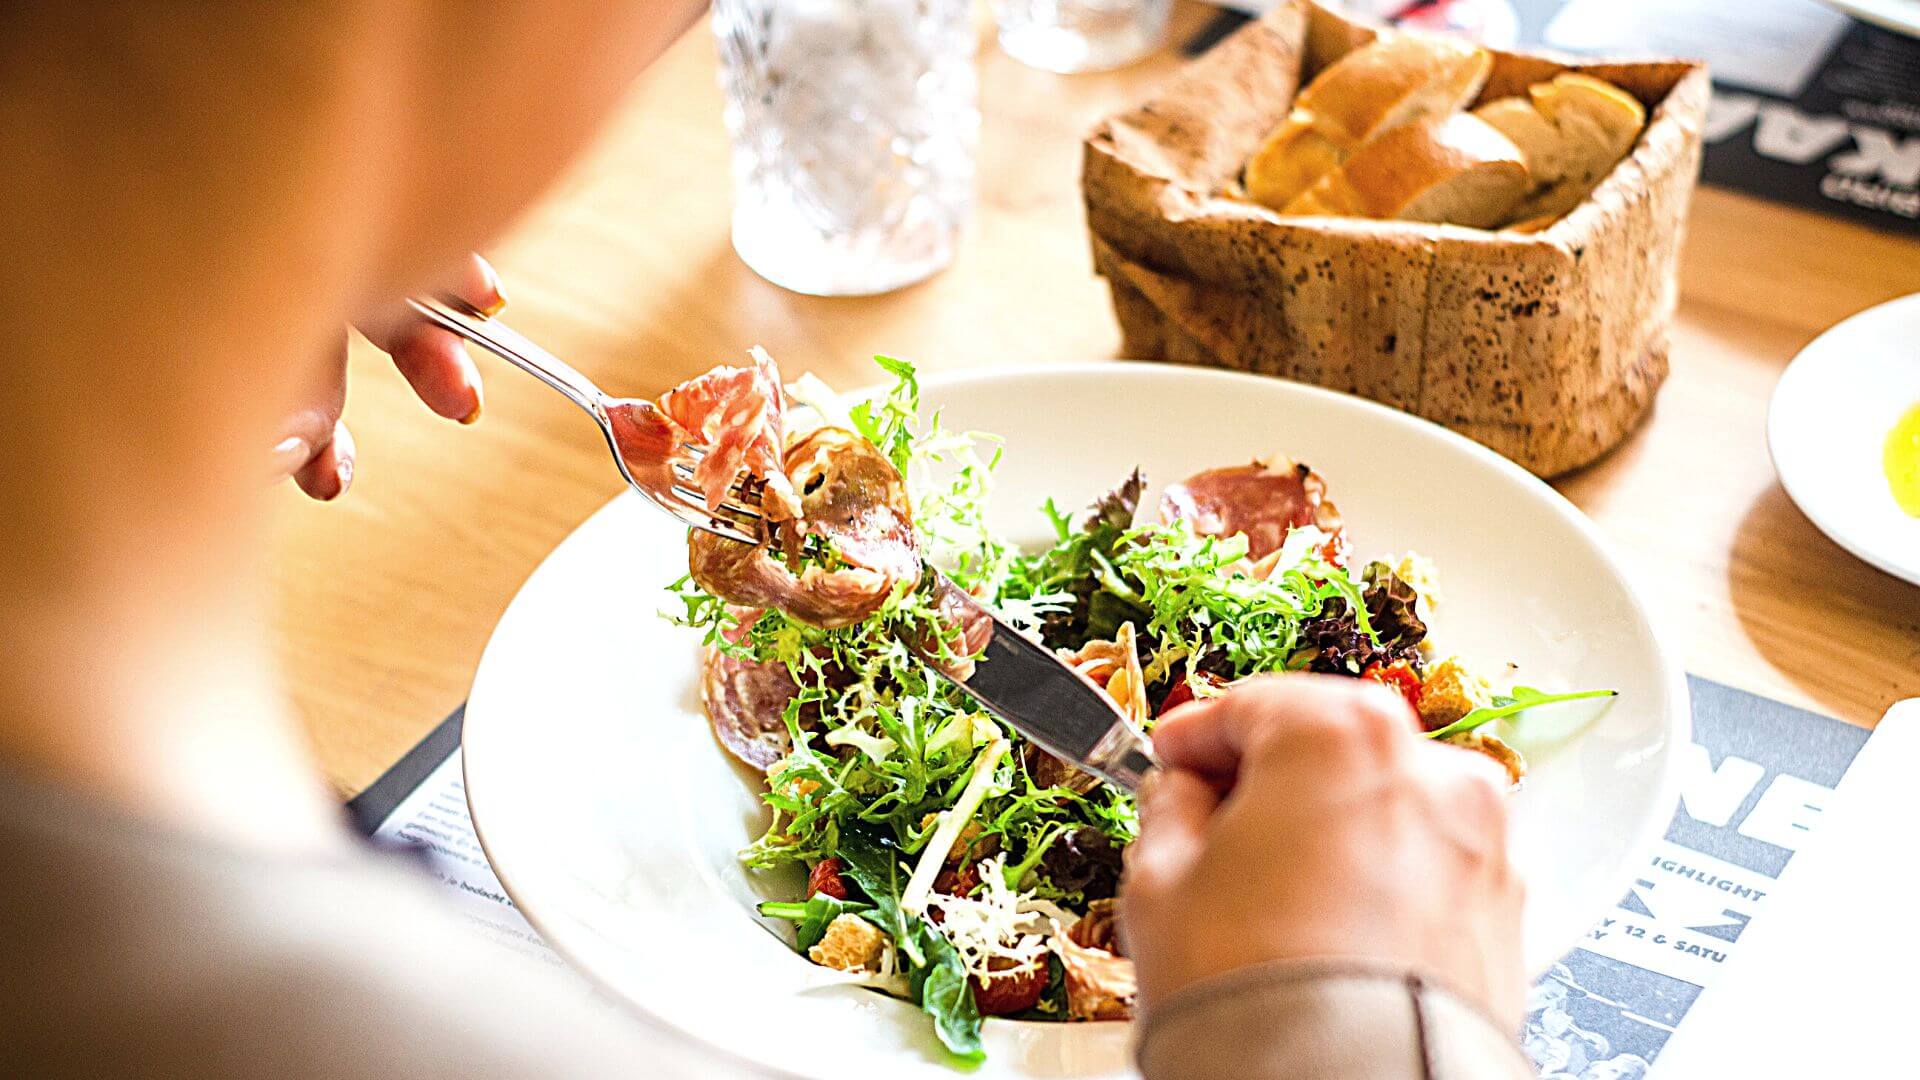 Closeup of a person eating a fresh salad with a basket of fresh bread on the table.